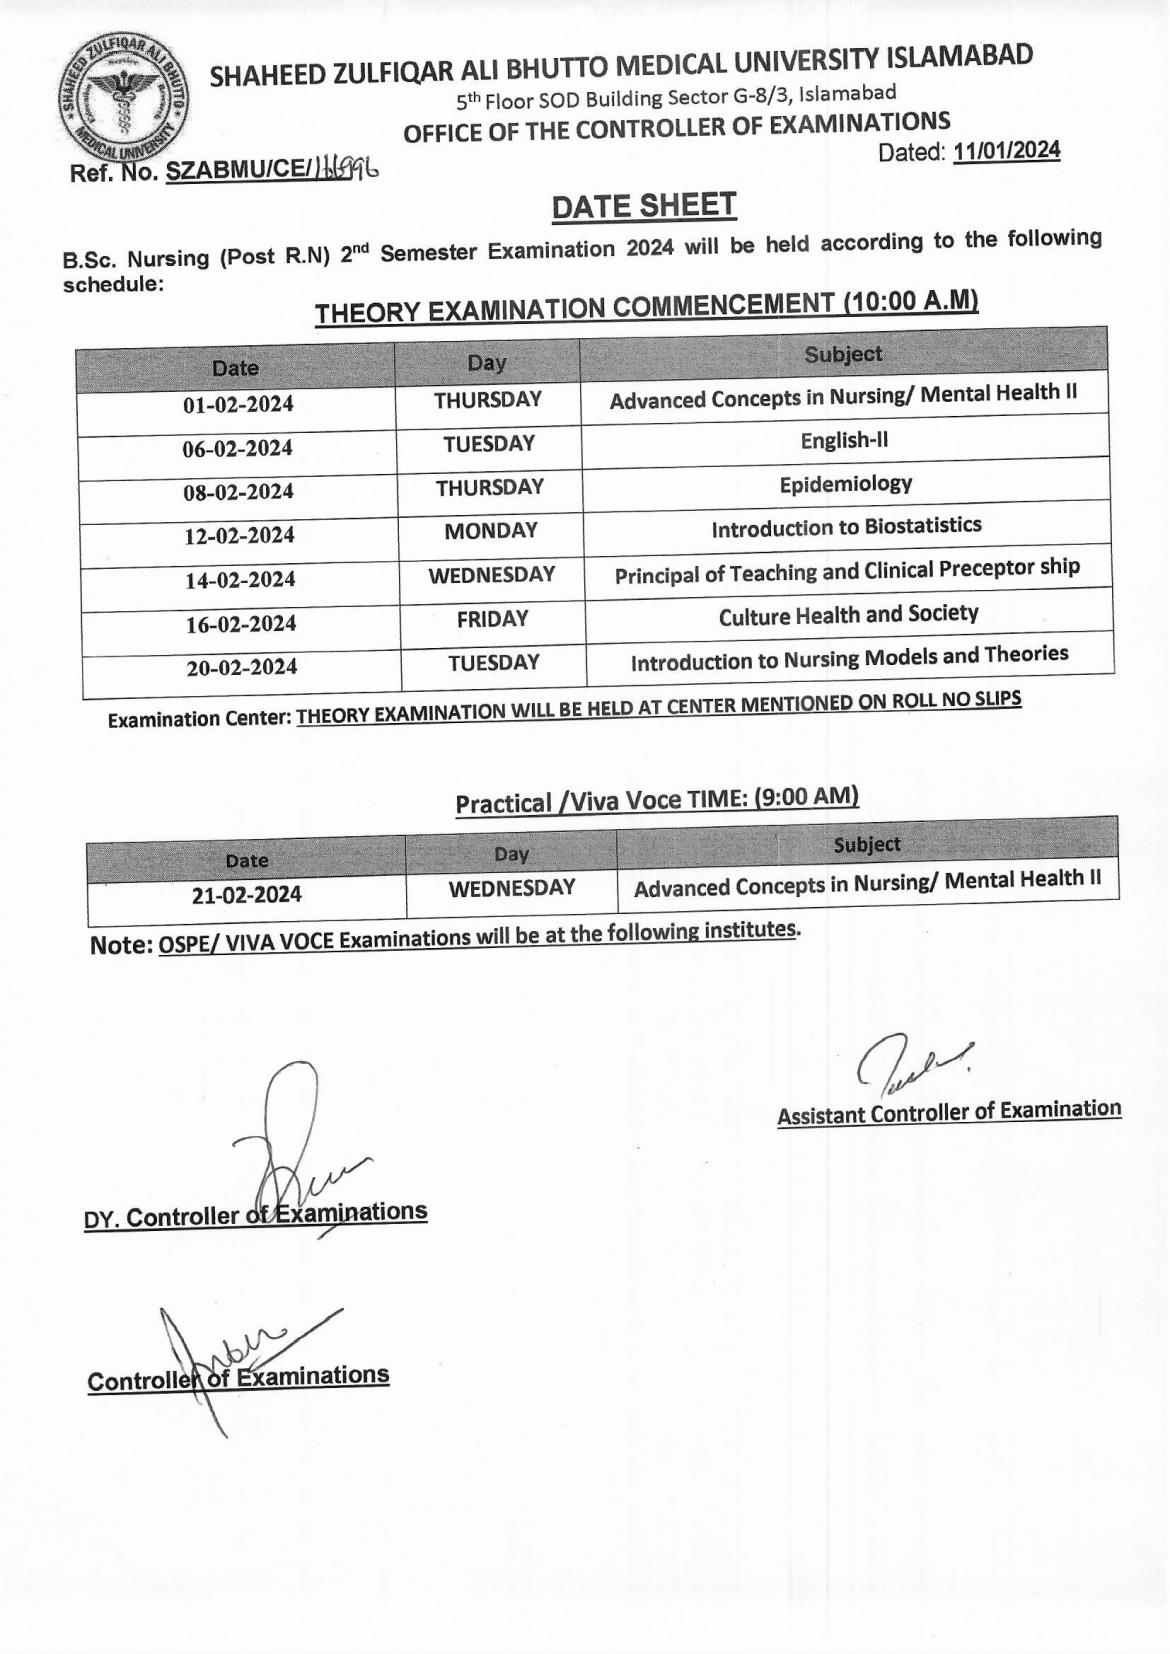 Date Sheet - BSc POST RN Examinations 2024